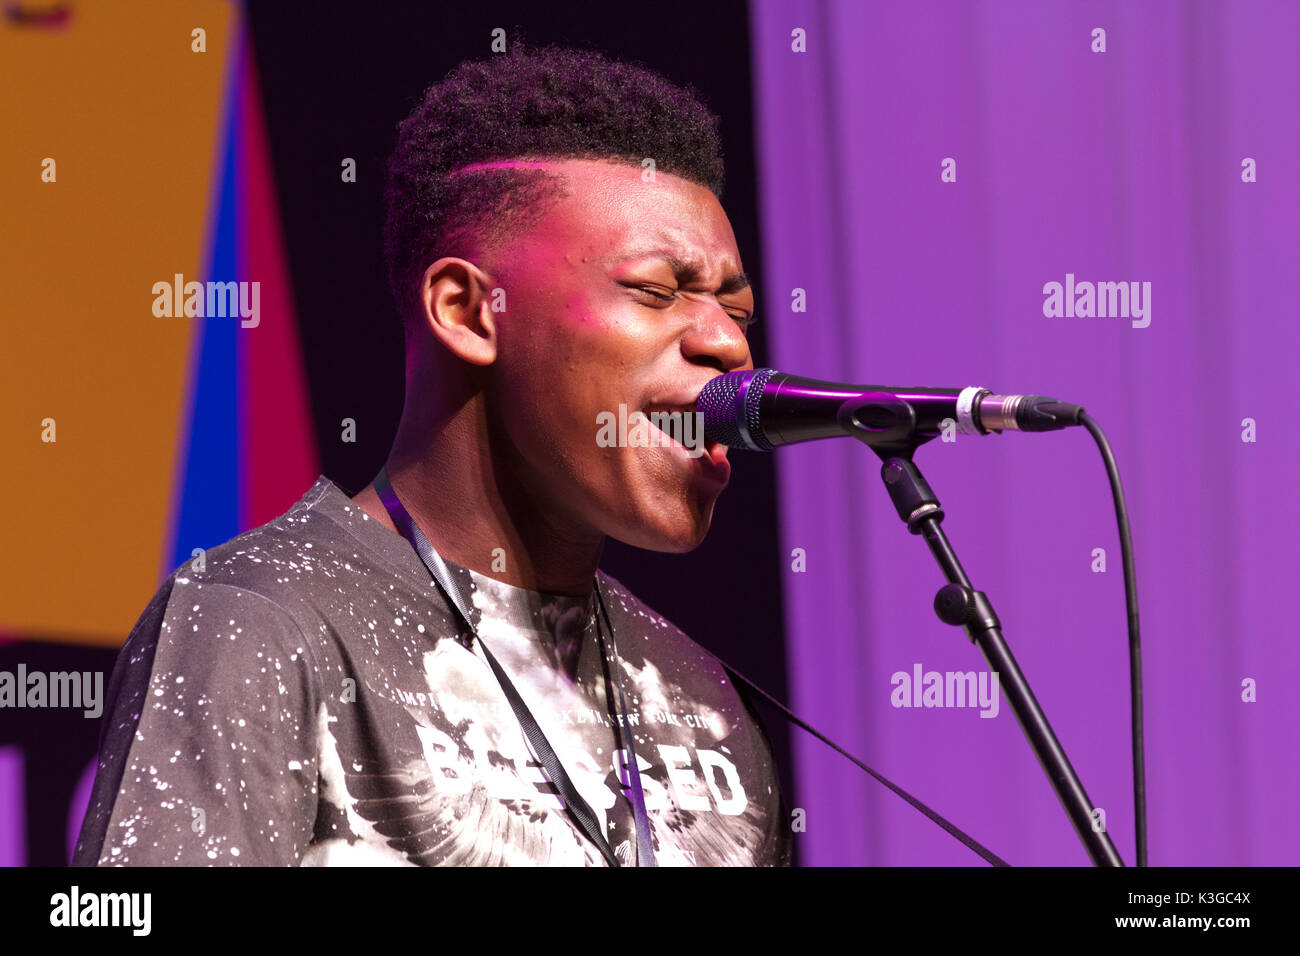 London, UK. 3rd September, 2017. Ky Music attends The Mayor of London’s Gigs Grand Final which took place in Westfield, Sheperds Bush,London. Twelve finalists battle it out .Gigs is more than a competition. For those who stay the course, a whole host of opportunities opens up to them through the wider Busk in London programme – paid bookings, private land busking schemes with earning potential, event management work and industry access.©Keith Larby/Alamy Live News Stock Photo